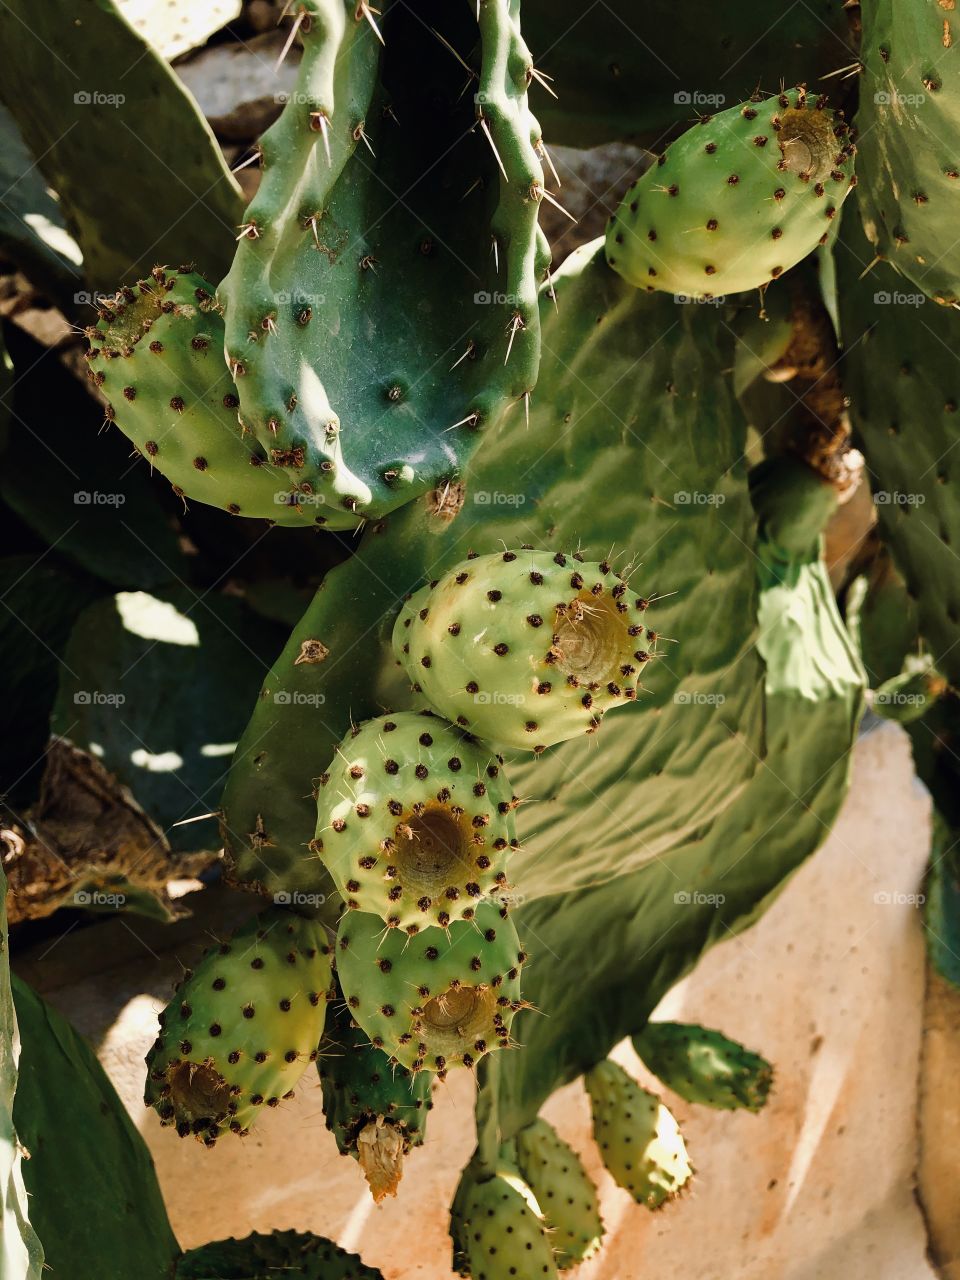 This photo is taken this morning, it shows the Maltese prickly pears growths in process, yet green soon to be colourful and delicious yum! While walking in the country side, so quiet -lovely